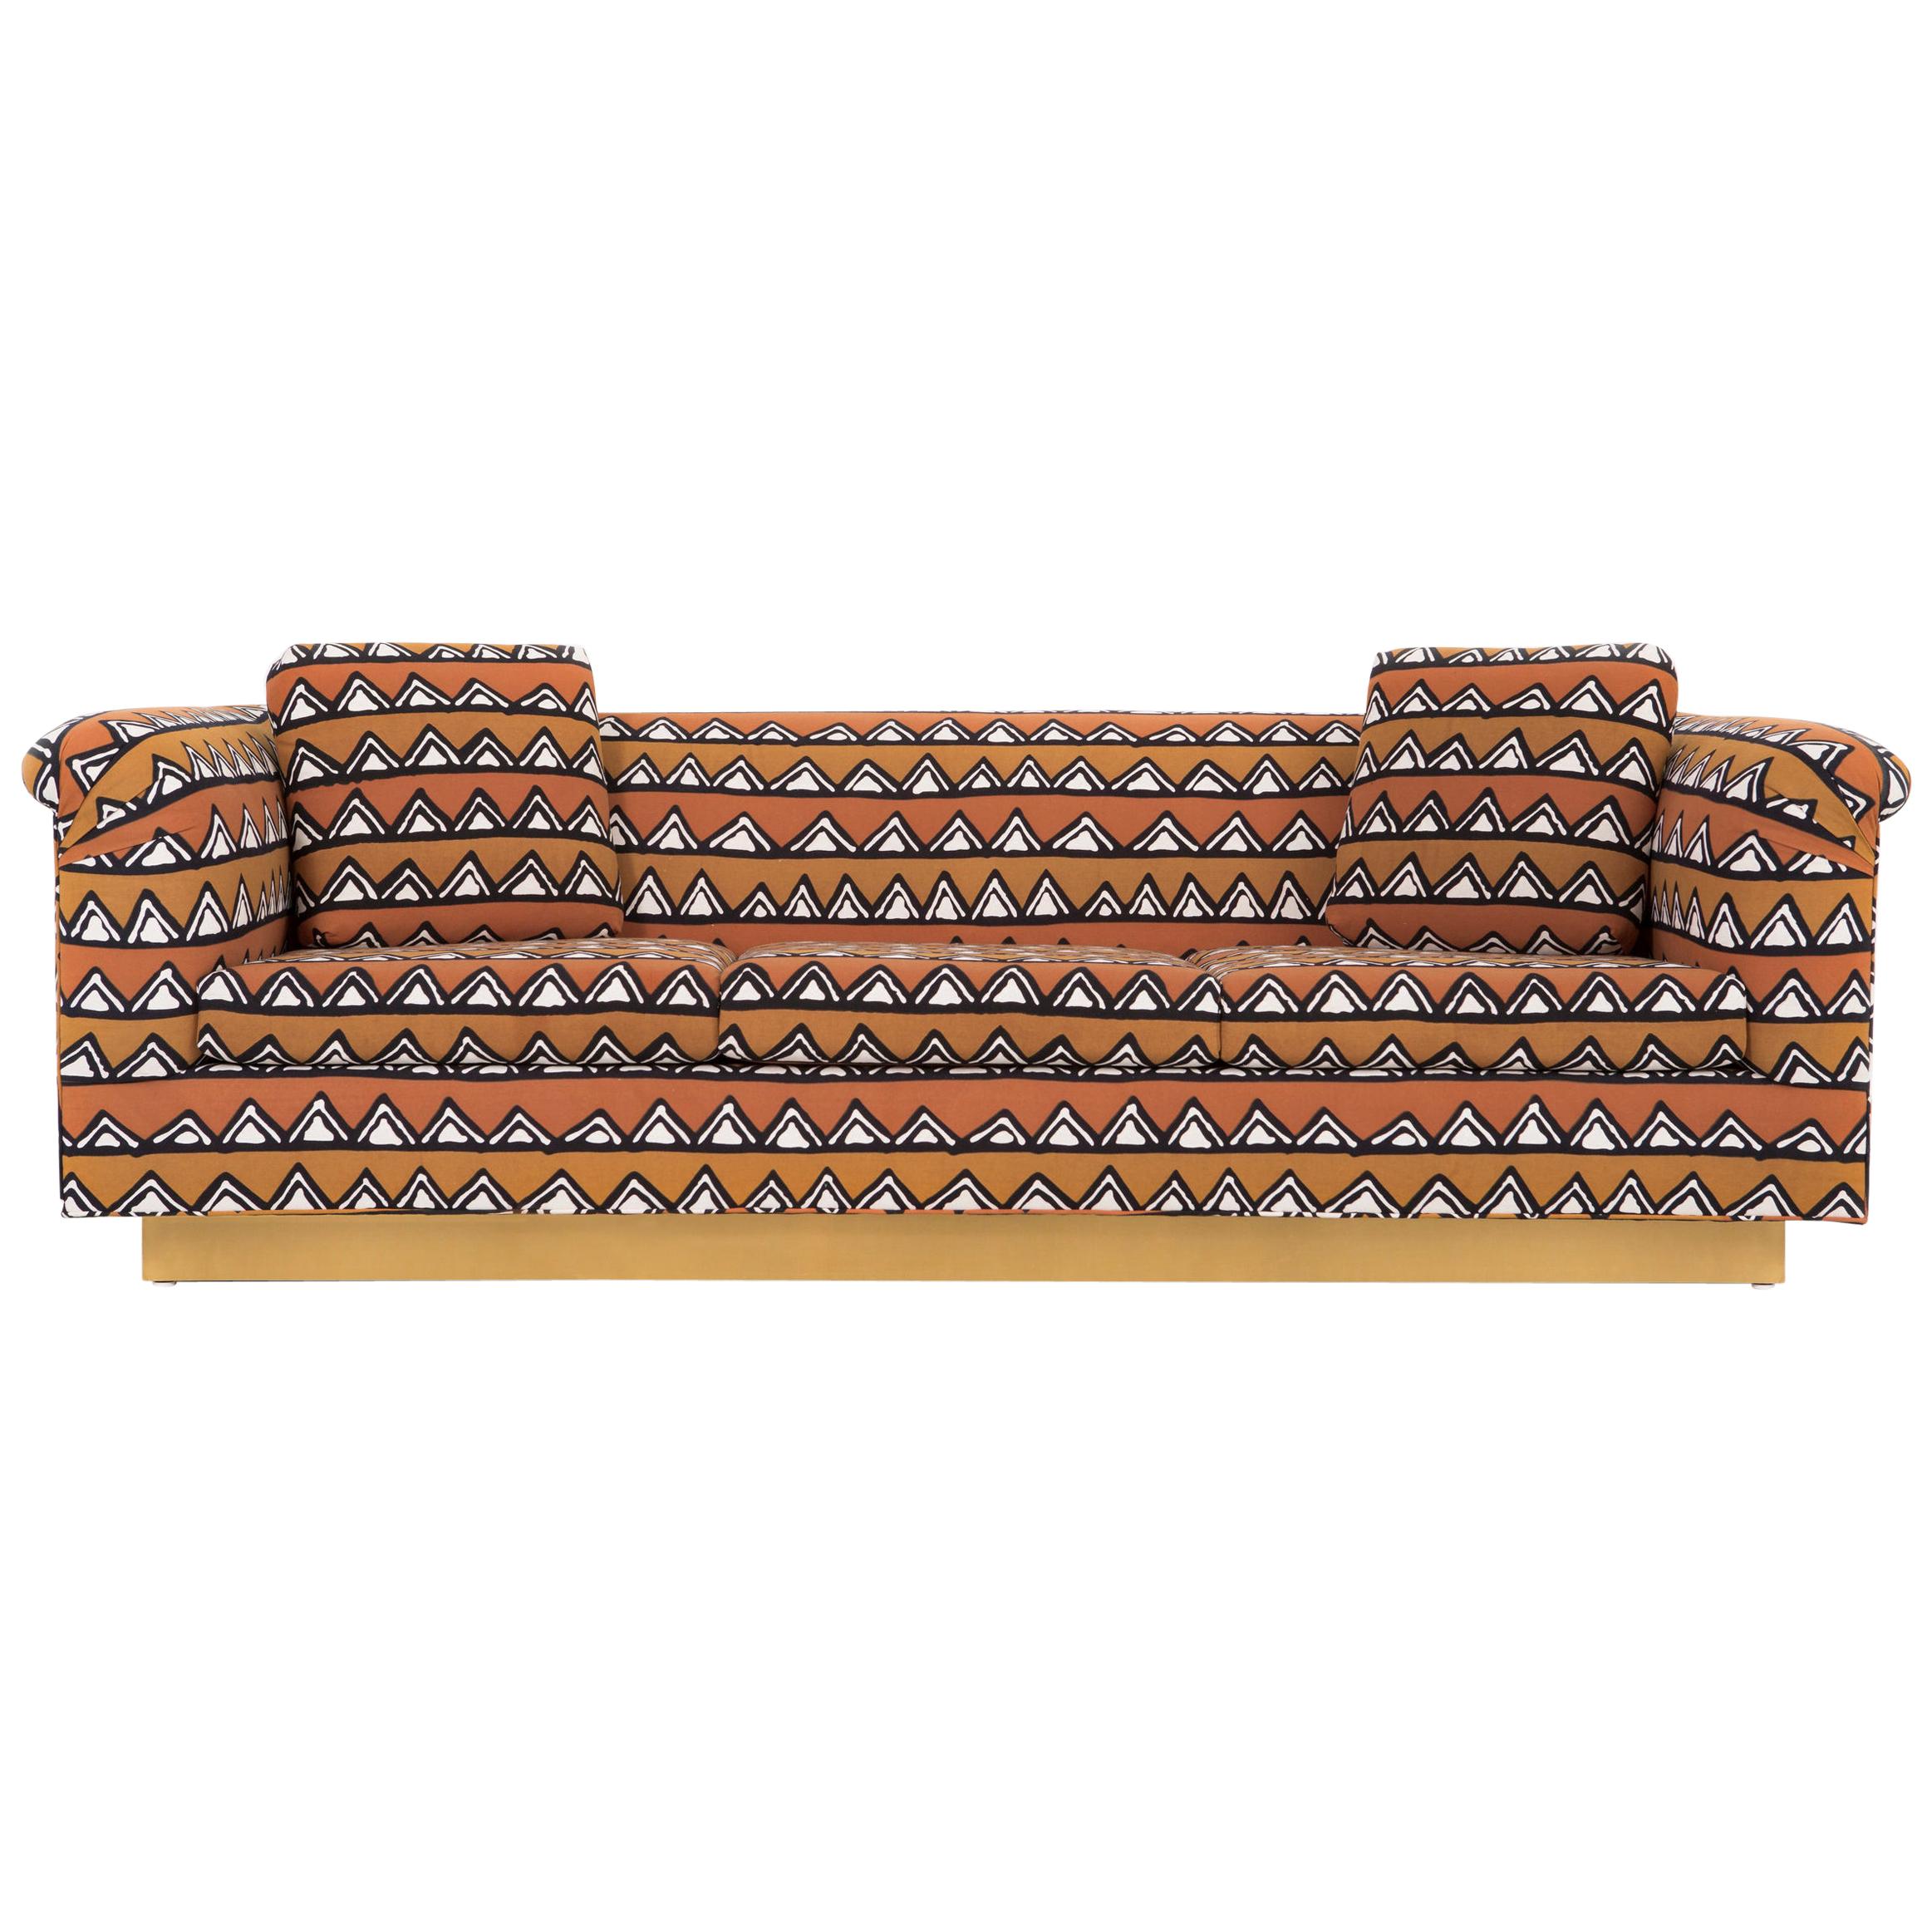 Sofa

Designed by Richard Himmel

USA, circa 1960s

Newly reupholstered in mud cloth from Zimbabwe with a brass base

Measures: 28” H x 90 ½” W x 35” D x seat 16 ½” H

Pictured with live edge coffee table by Jerry L Smuck (sold).